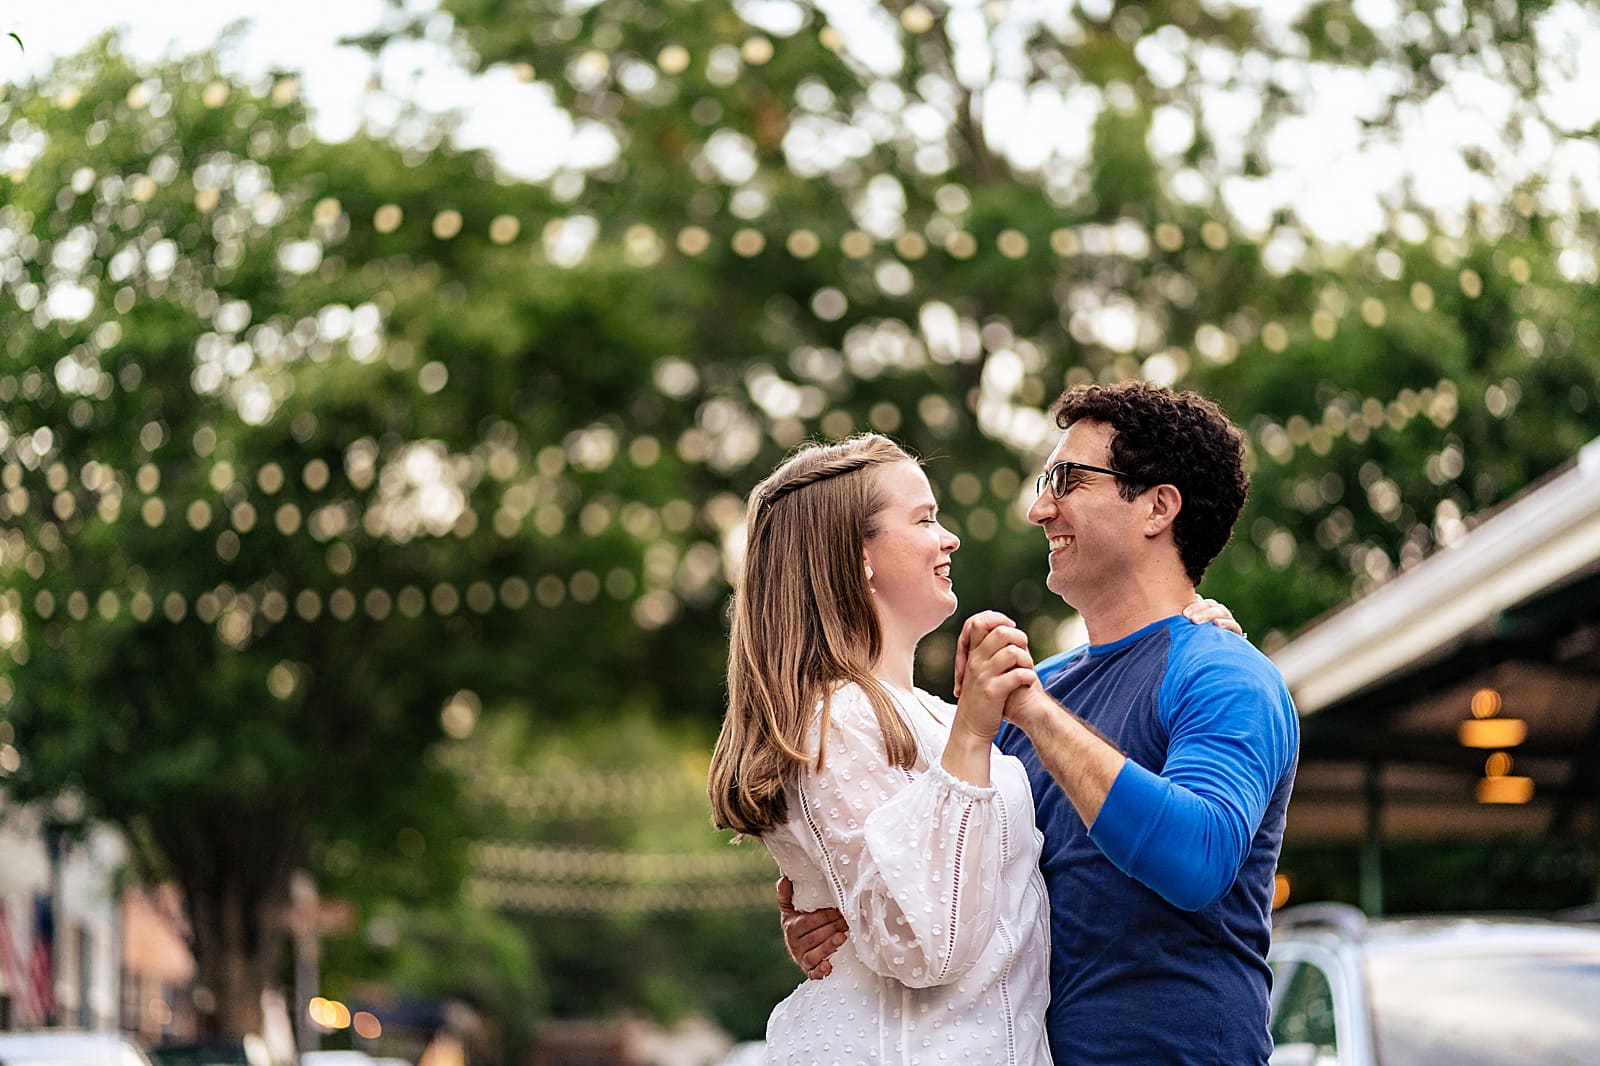 With its cobblestone streets and string lights, City Market in downtown Raleigh makes for a great engagement session location